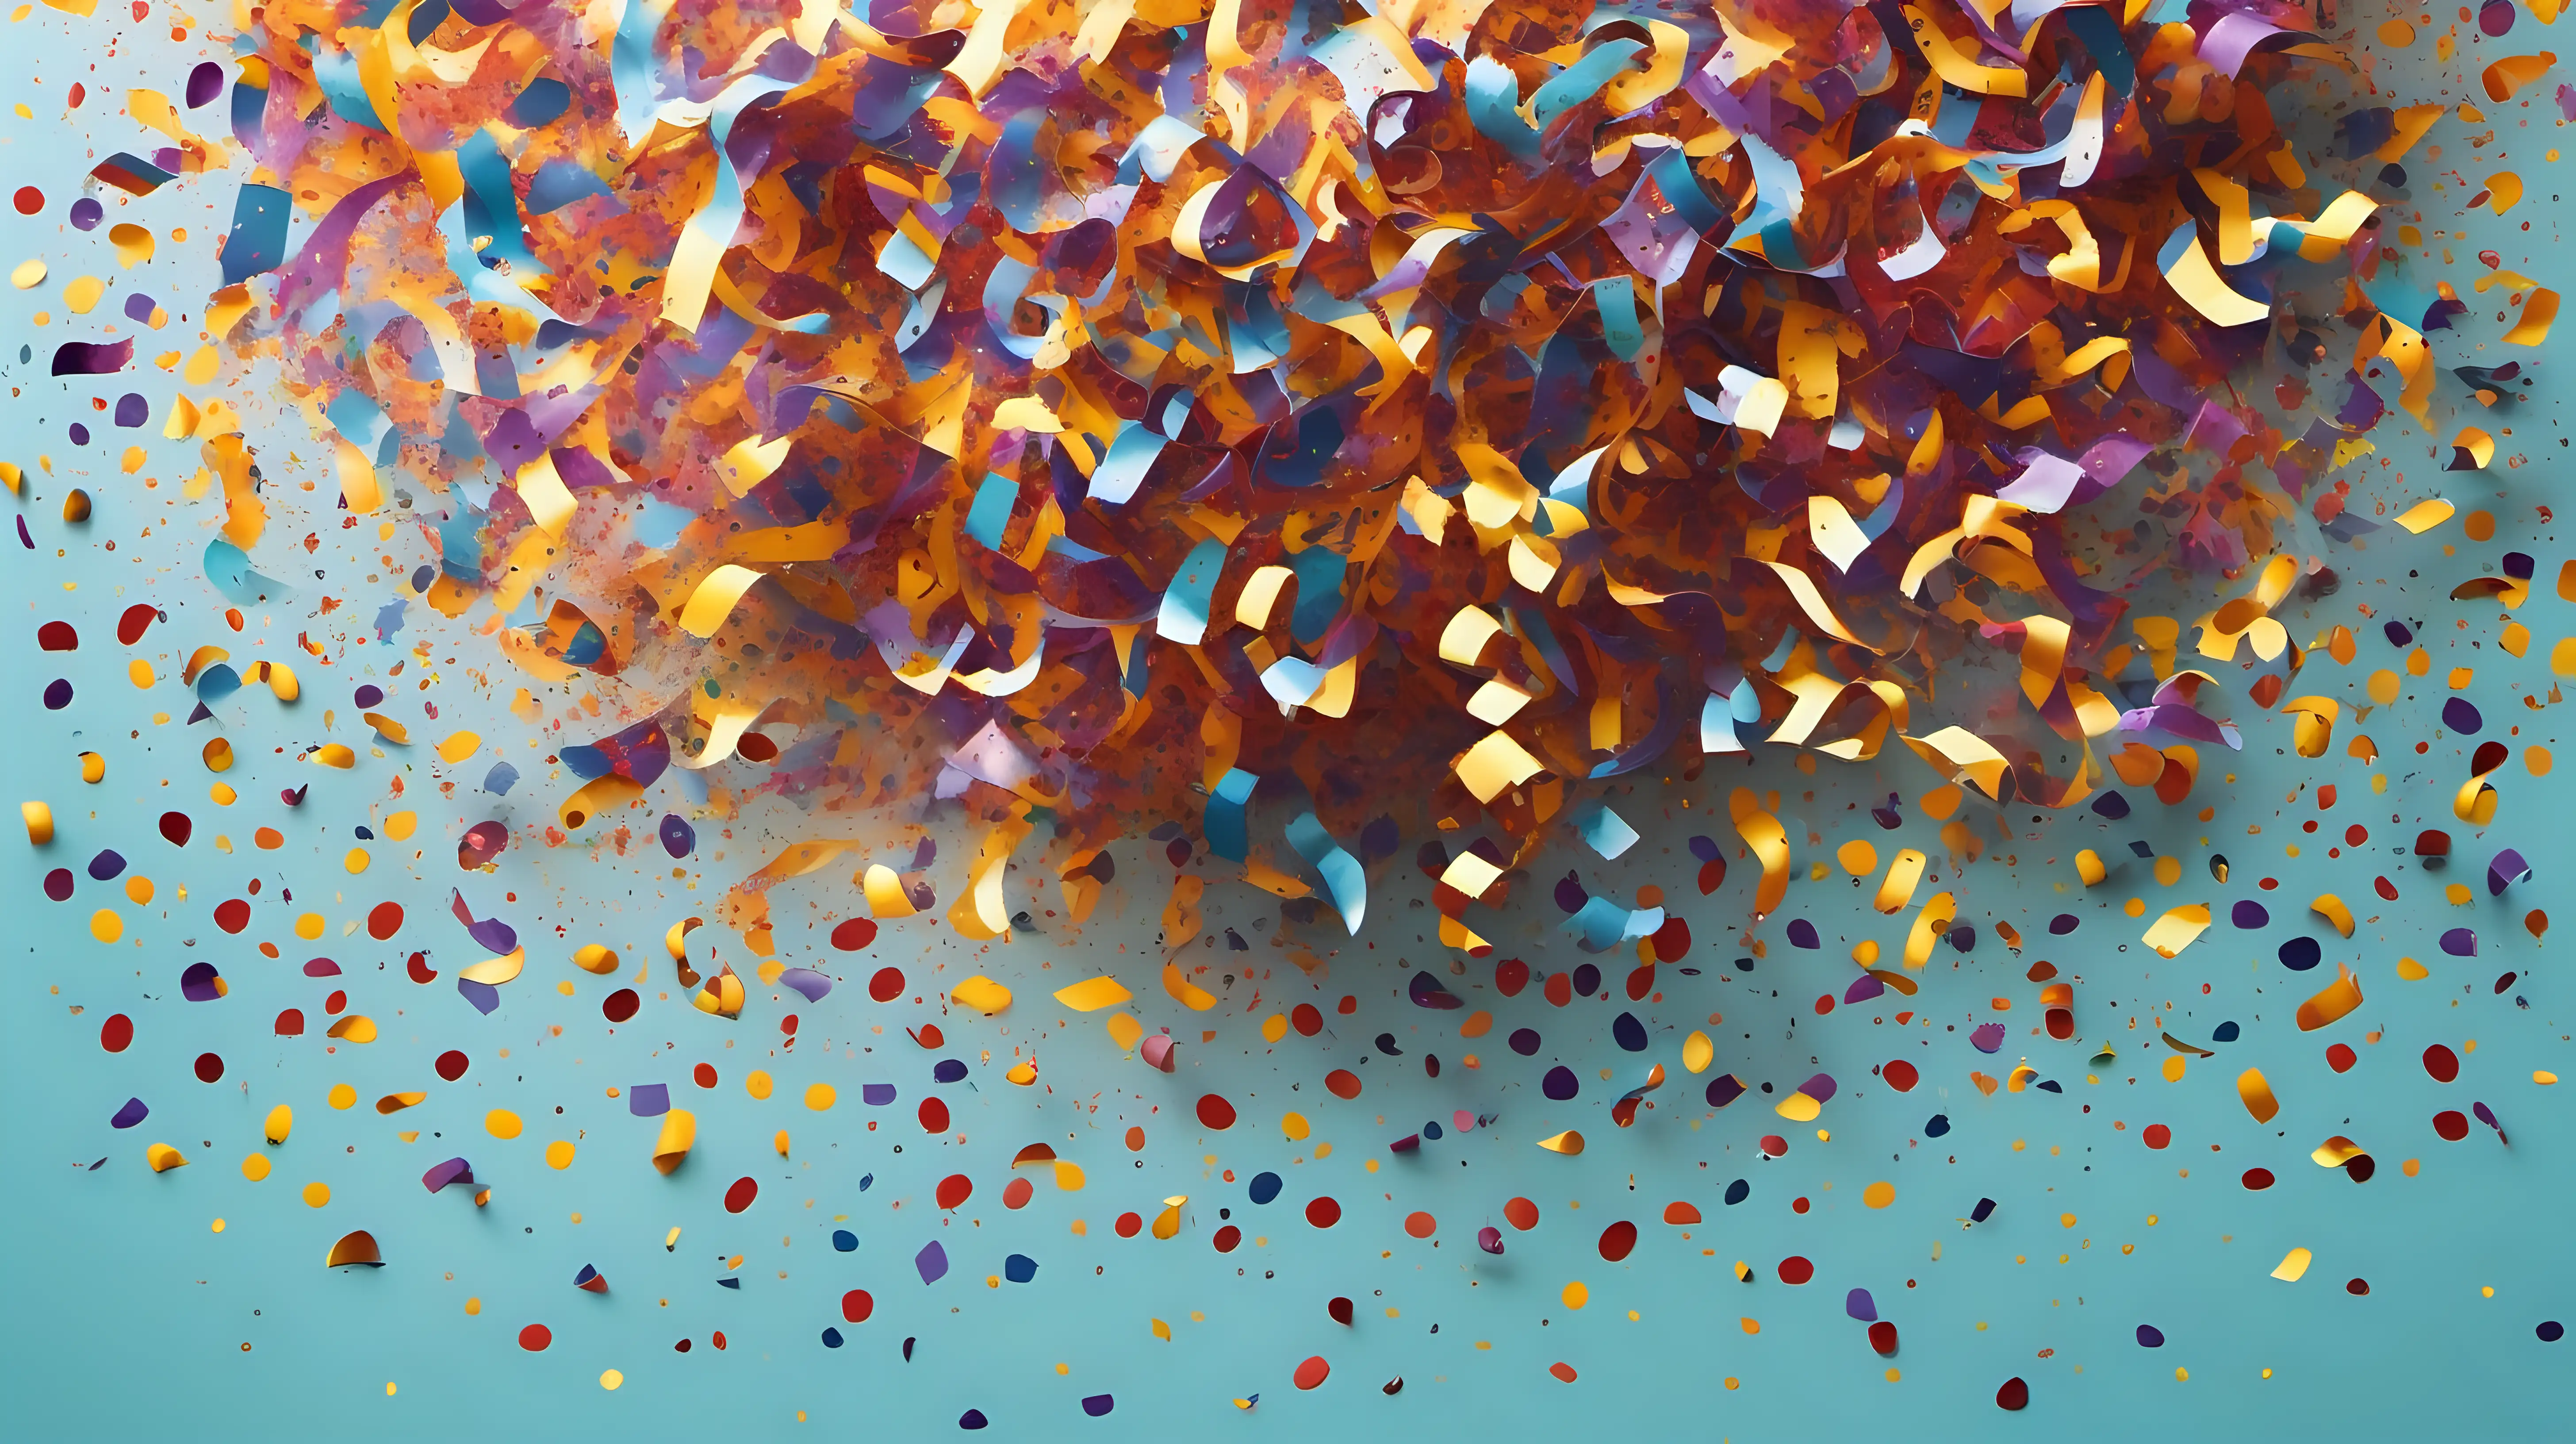 Craft an abstract background with an explosion of colorful confetti, conveying a sense of celebration, joy, and festivity